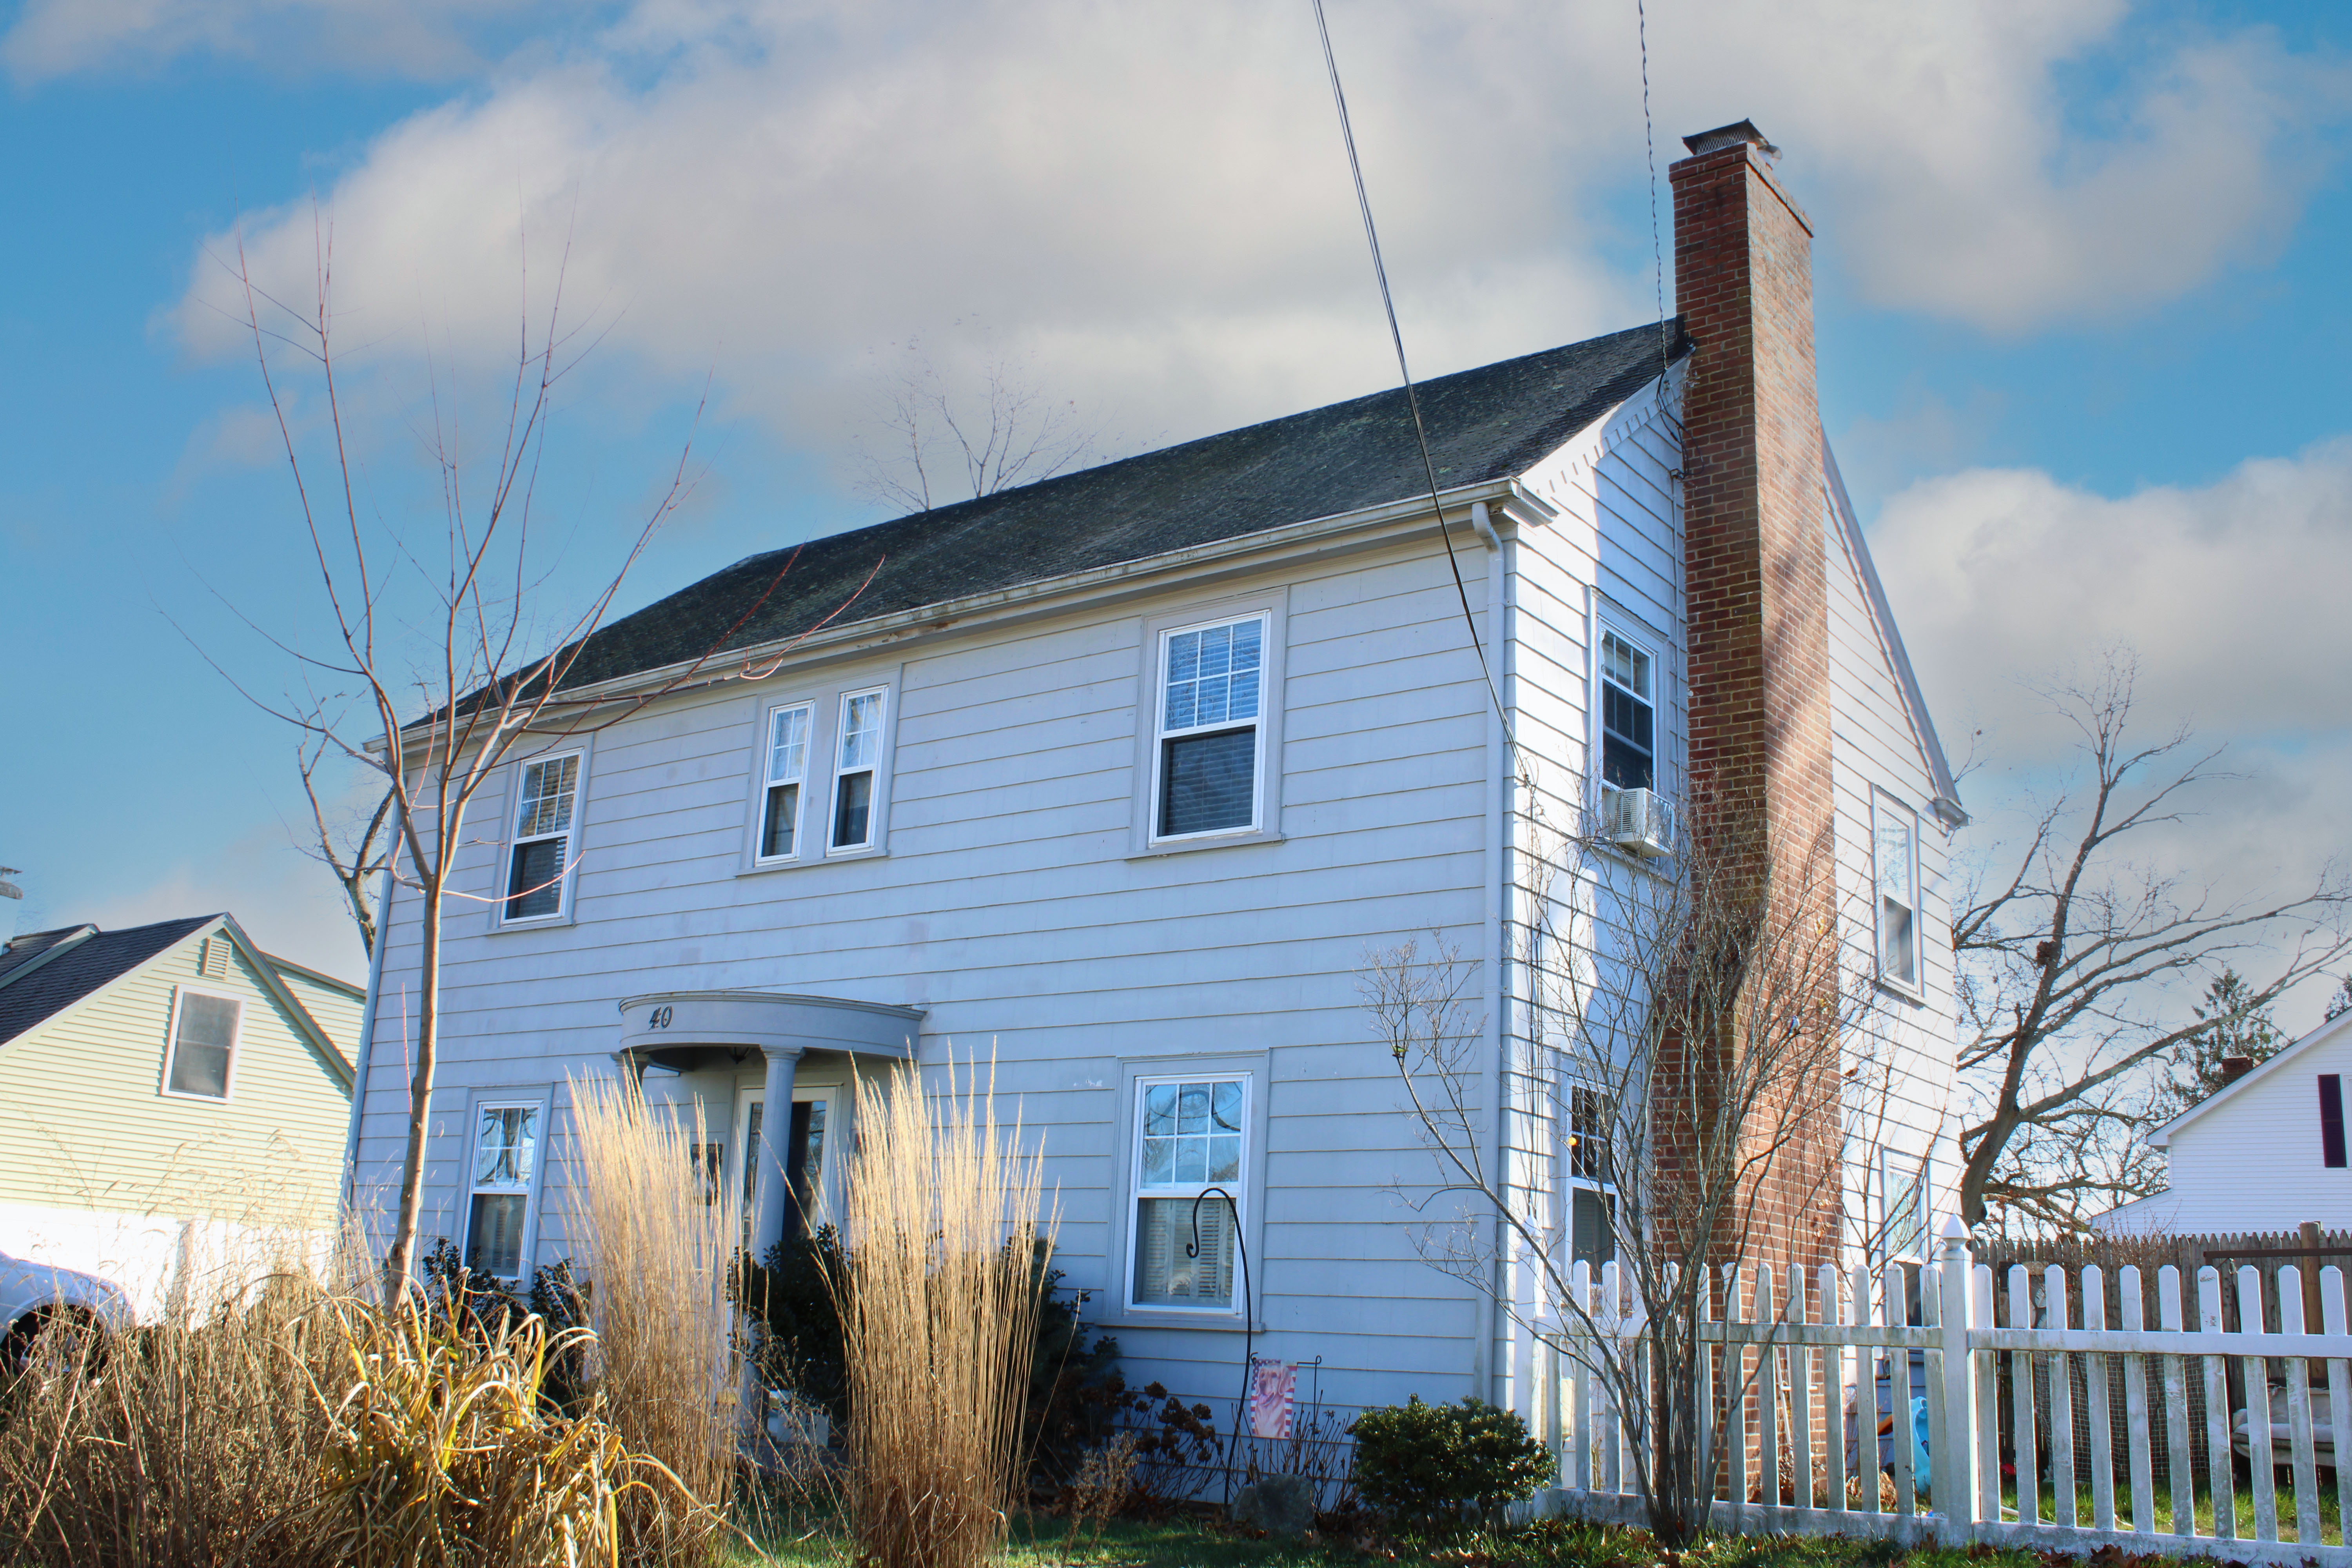 Lovely Colonial Home for Sale in Warwick Rhode Island 40 Brewster Drive $324,900